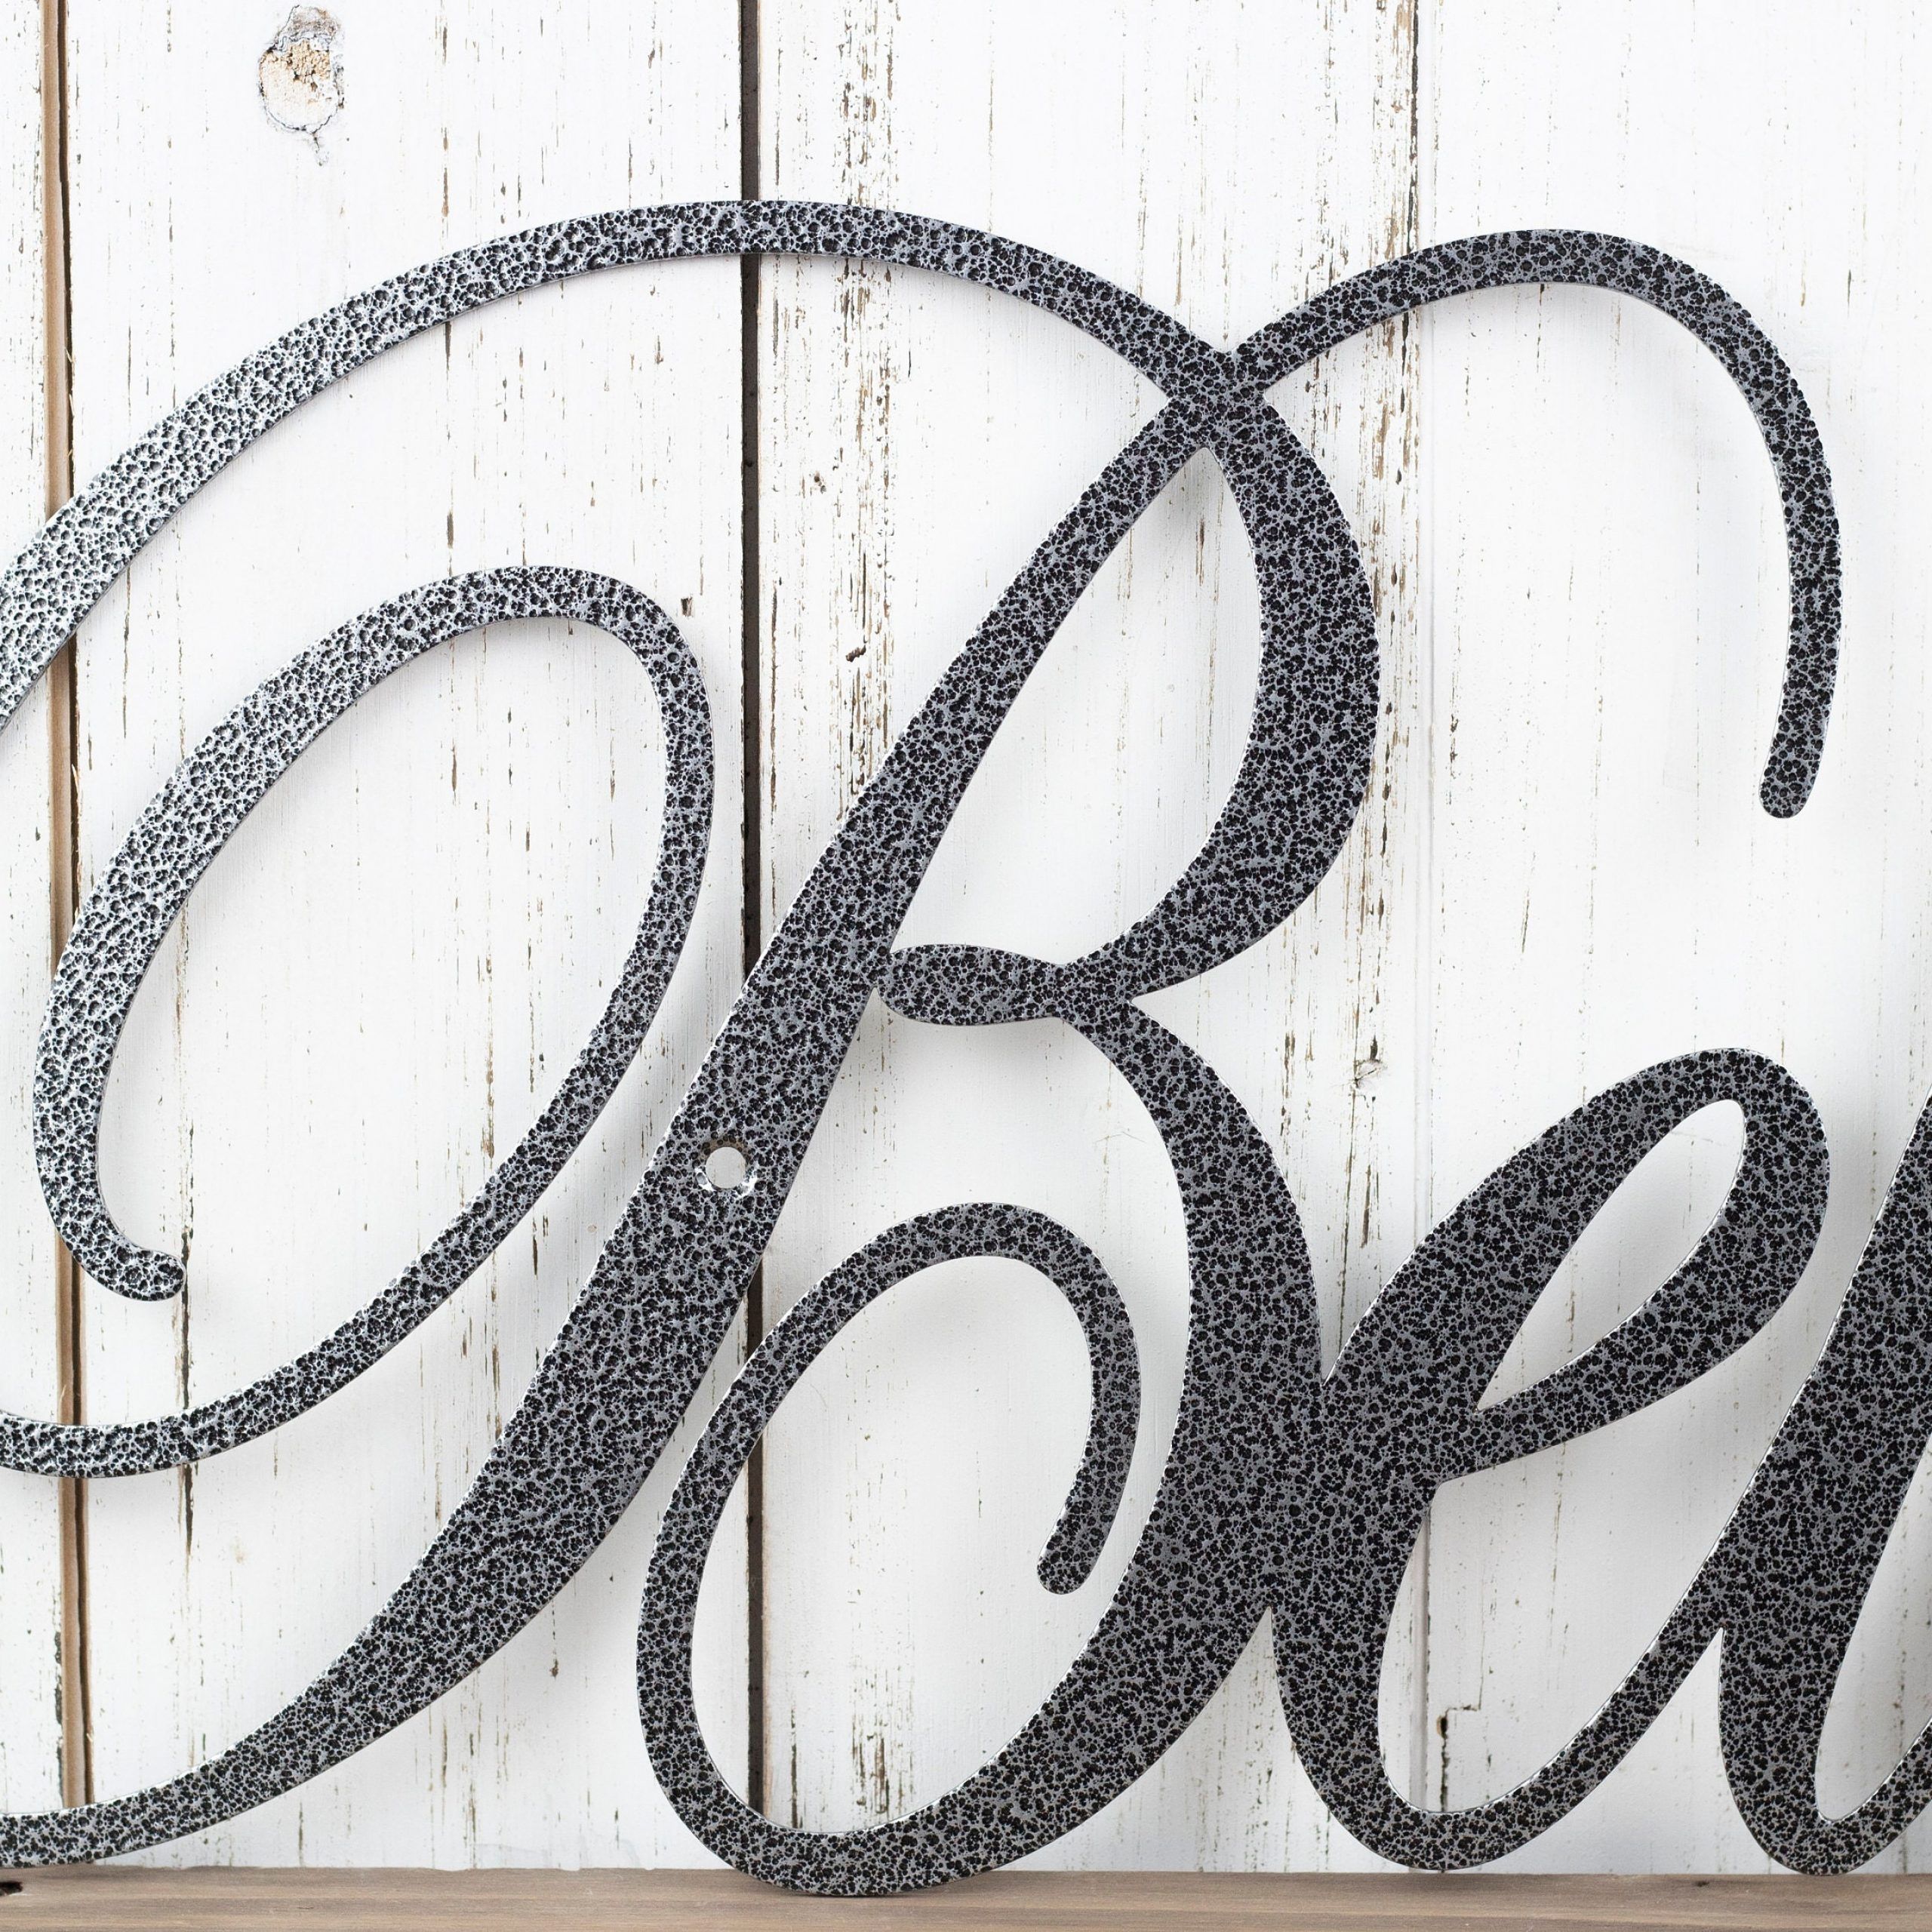 Believe Metal Sign | Metal Wall Art | Christmas Decor | Metal Wall Intended For Most Up To Date Nickel Metal Wall Art (View 19 of 20)